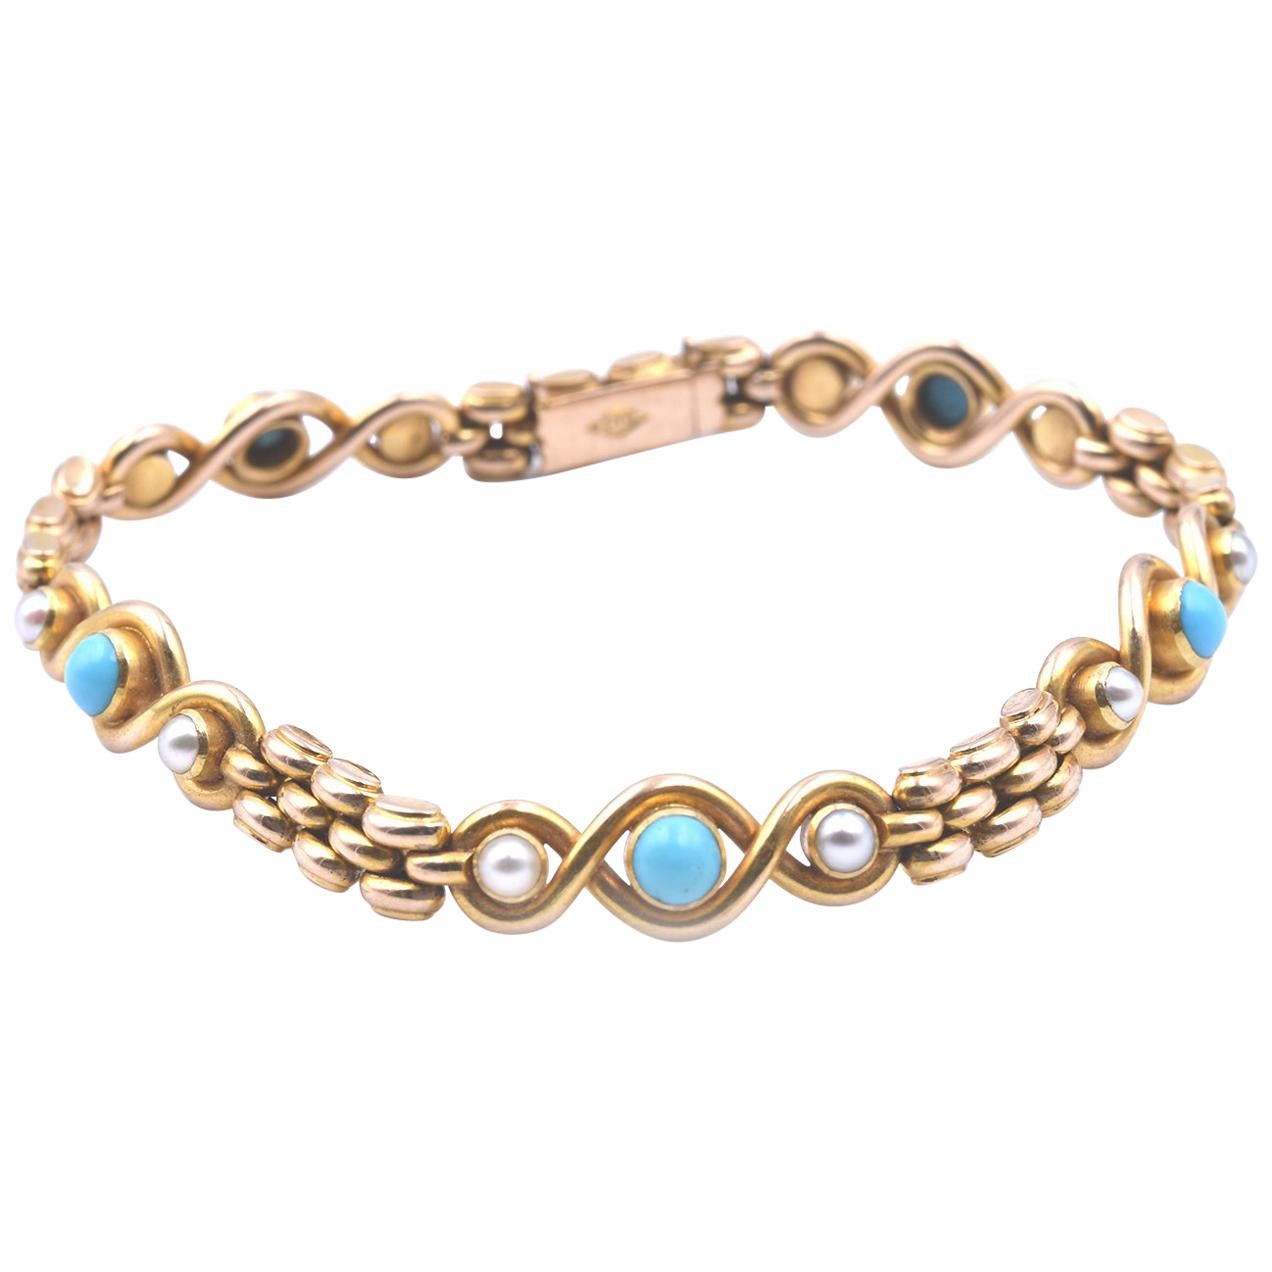 15 Karat Yellow Gold Turquoise and Pearl Bracelet